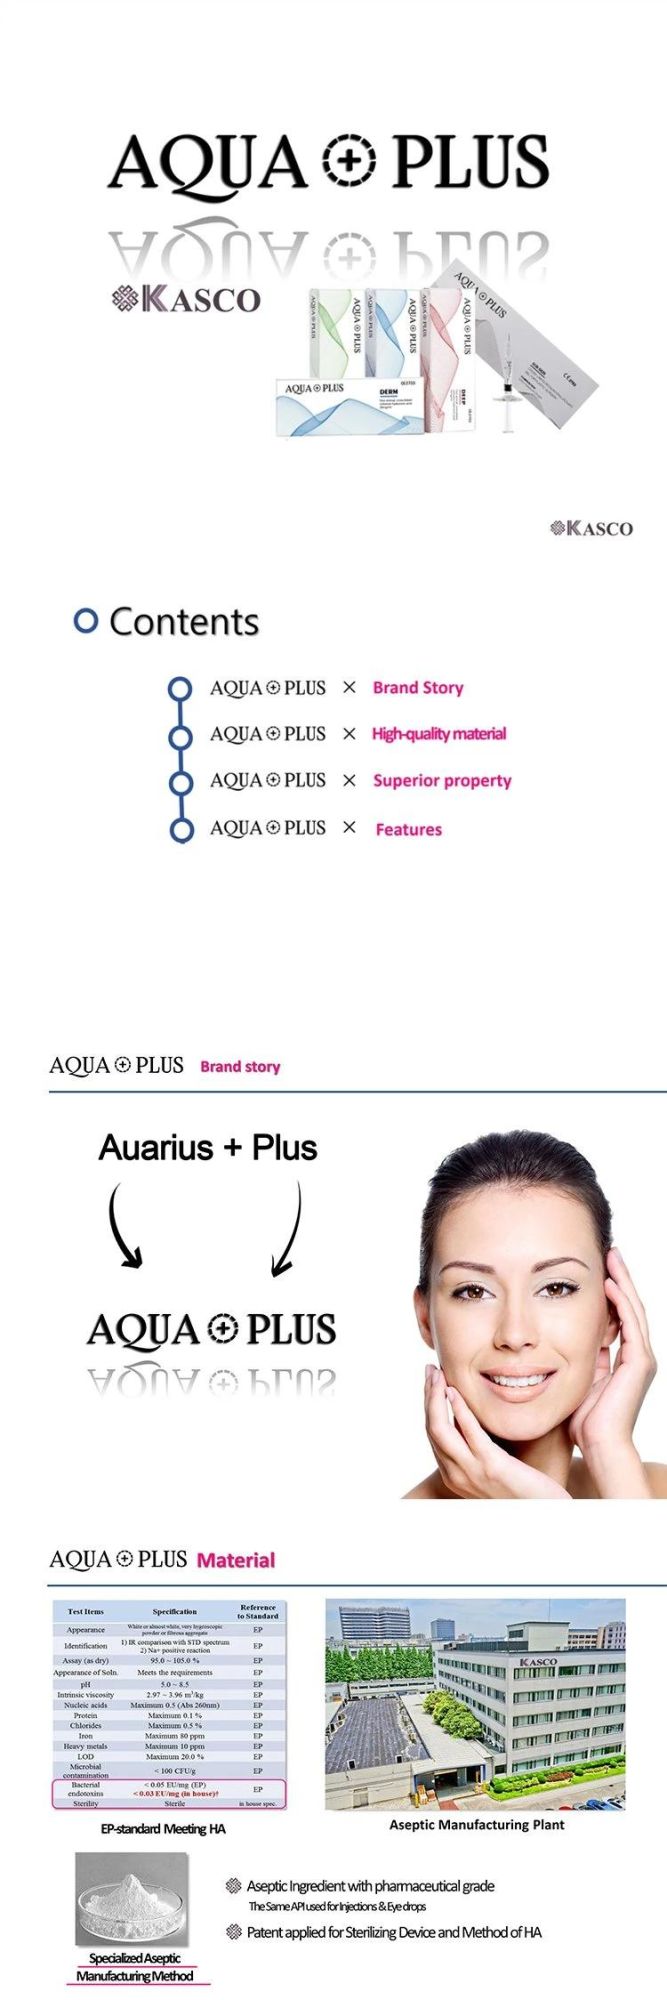 Aqua Plus 1ml Injectable Face Dermal Fillers Hyaluronic Acid Injection for Skin